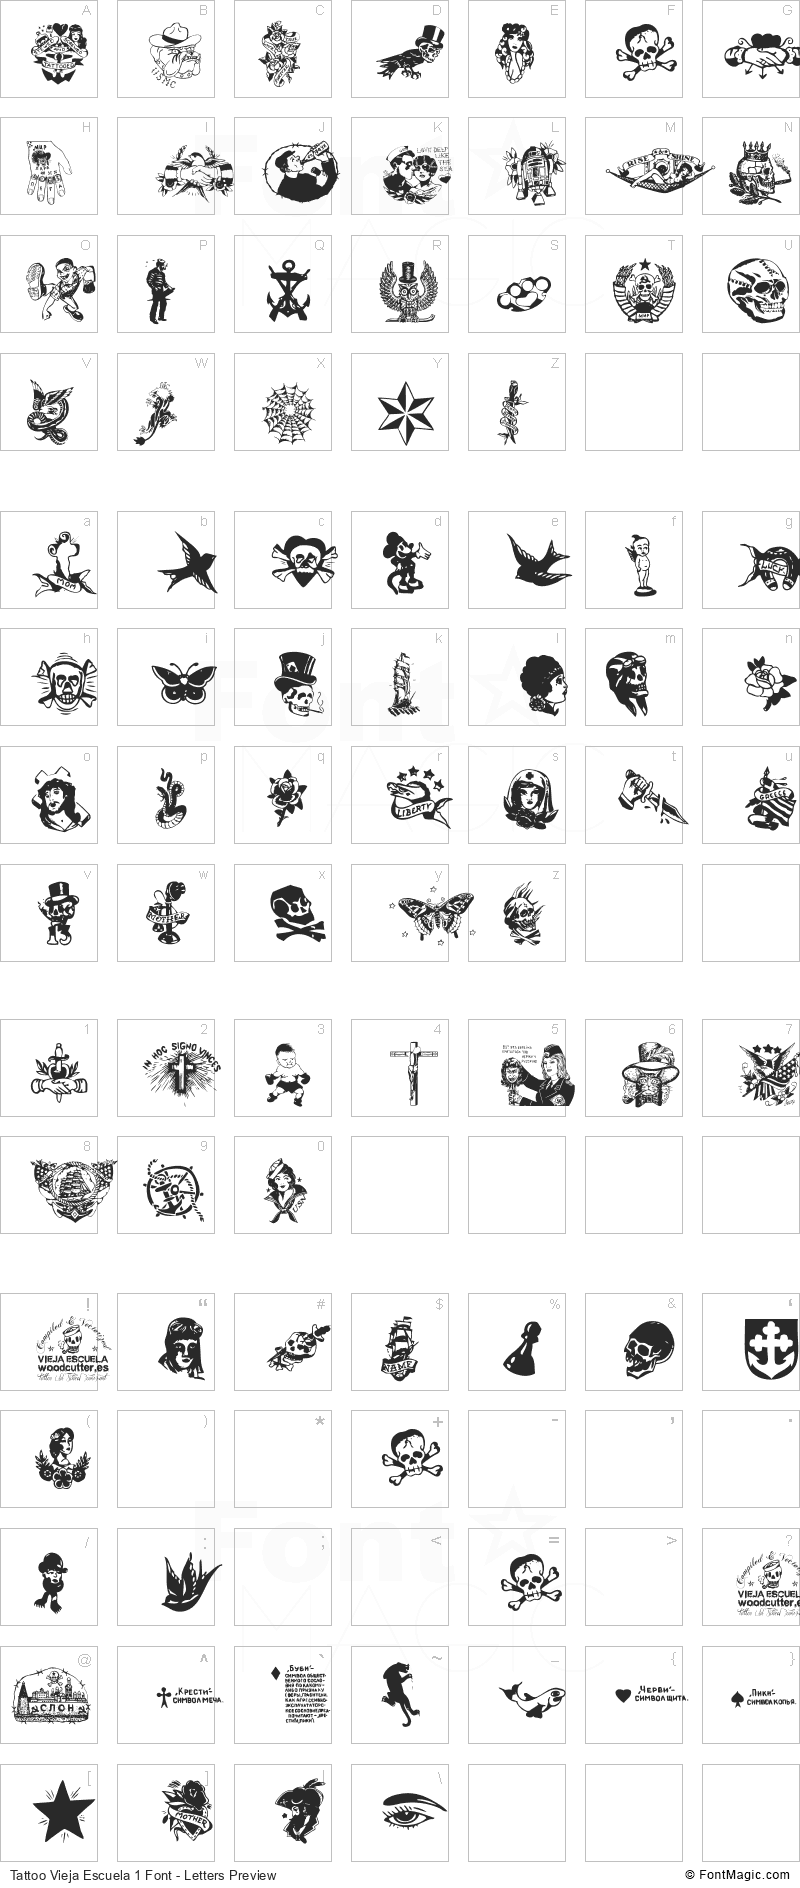 Tattoo Vieja Escuela 1 Font - All Latters Preview Chart